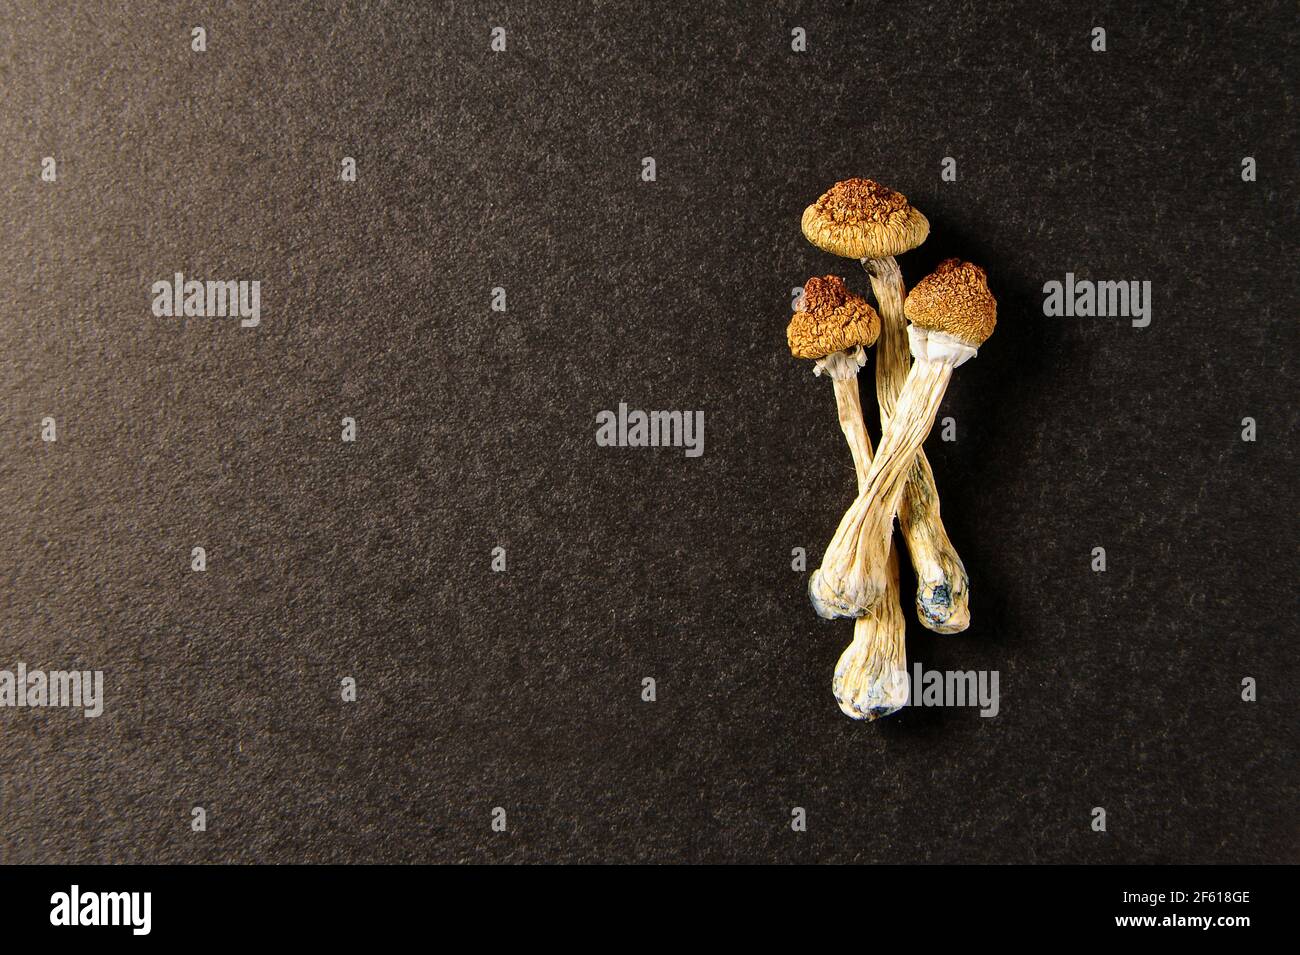 Dried psilocybin mushrooms on black background. Psychedelic, mind-blowing, magic mushroom. Medical use. Microdosing concept. Stock Photo